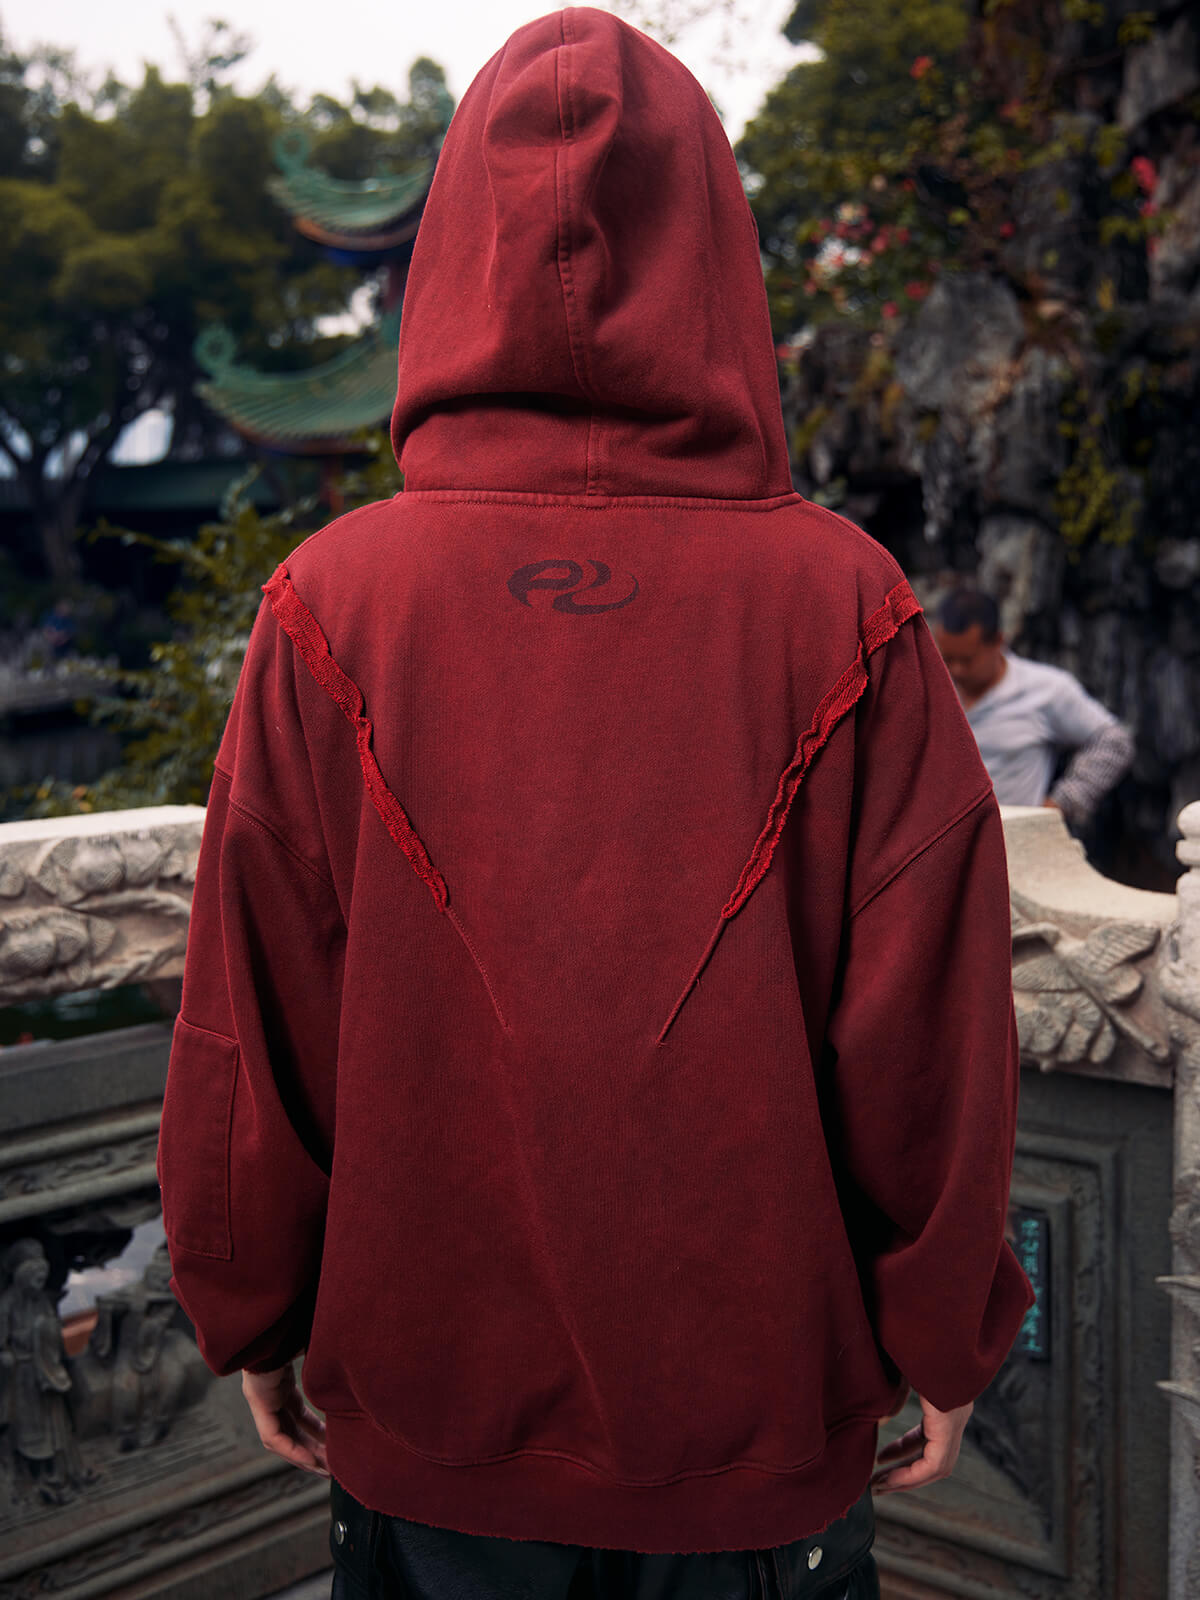 Personsoul Chinese Year Of The Dragon Hoodie